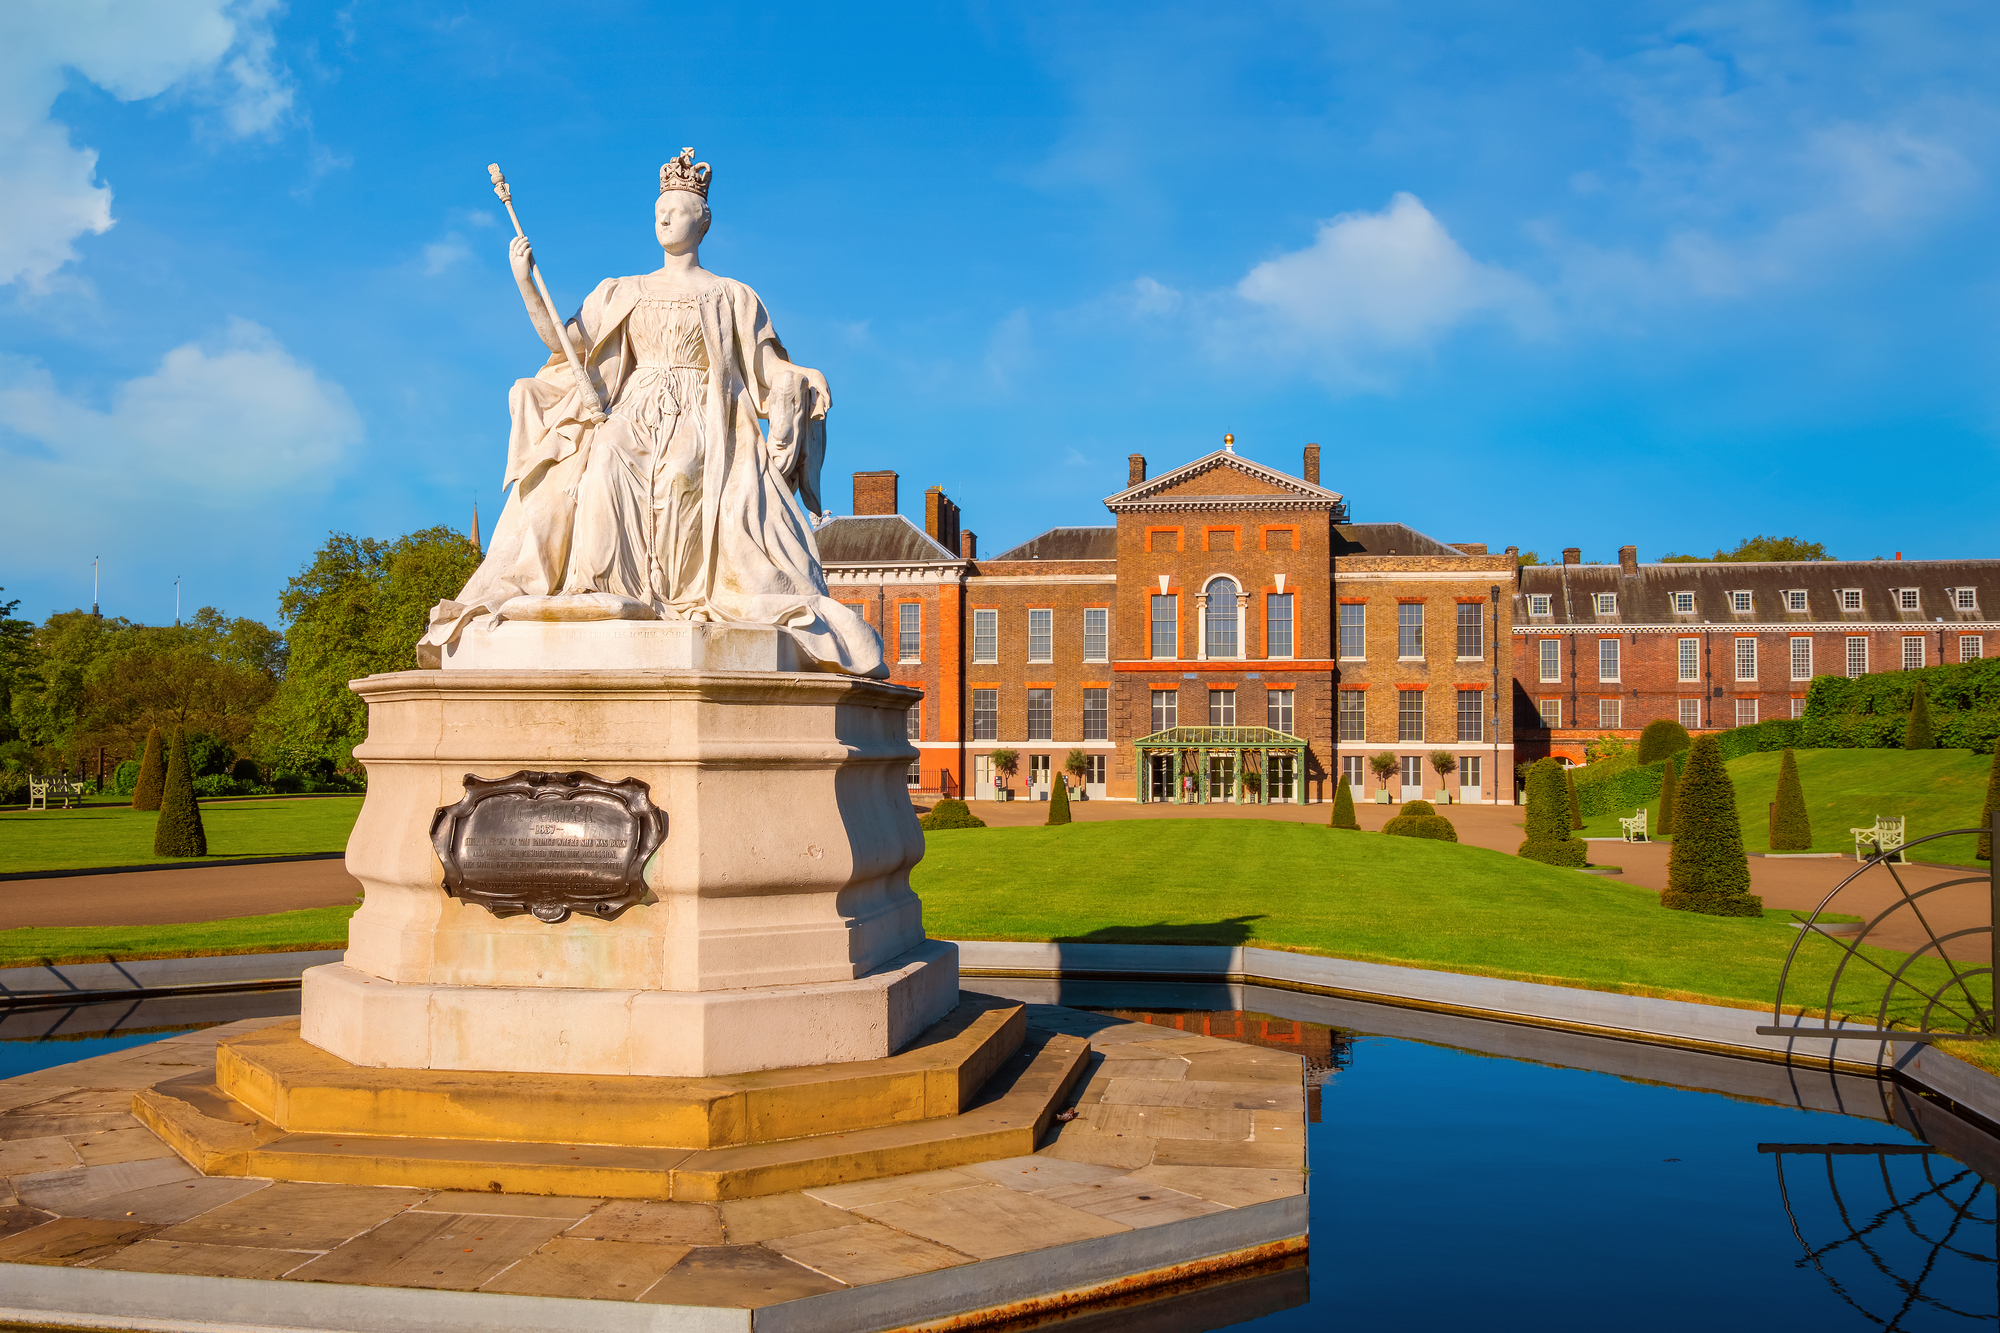 10 things you didn't know about Kensington Palace